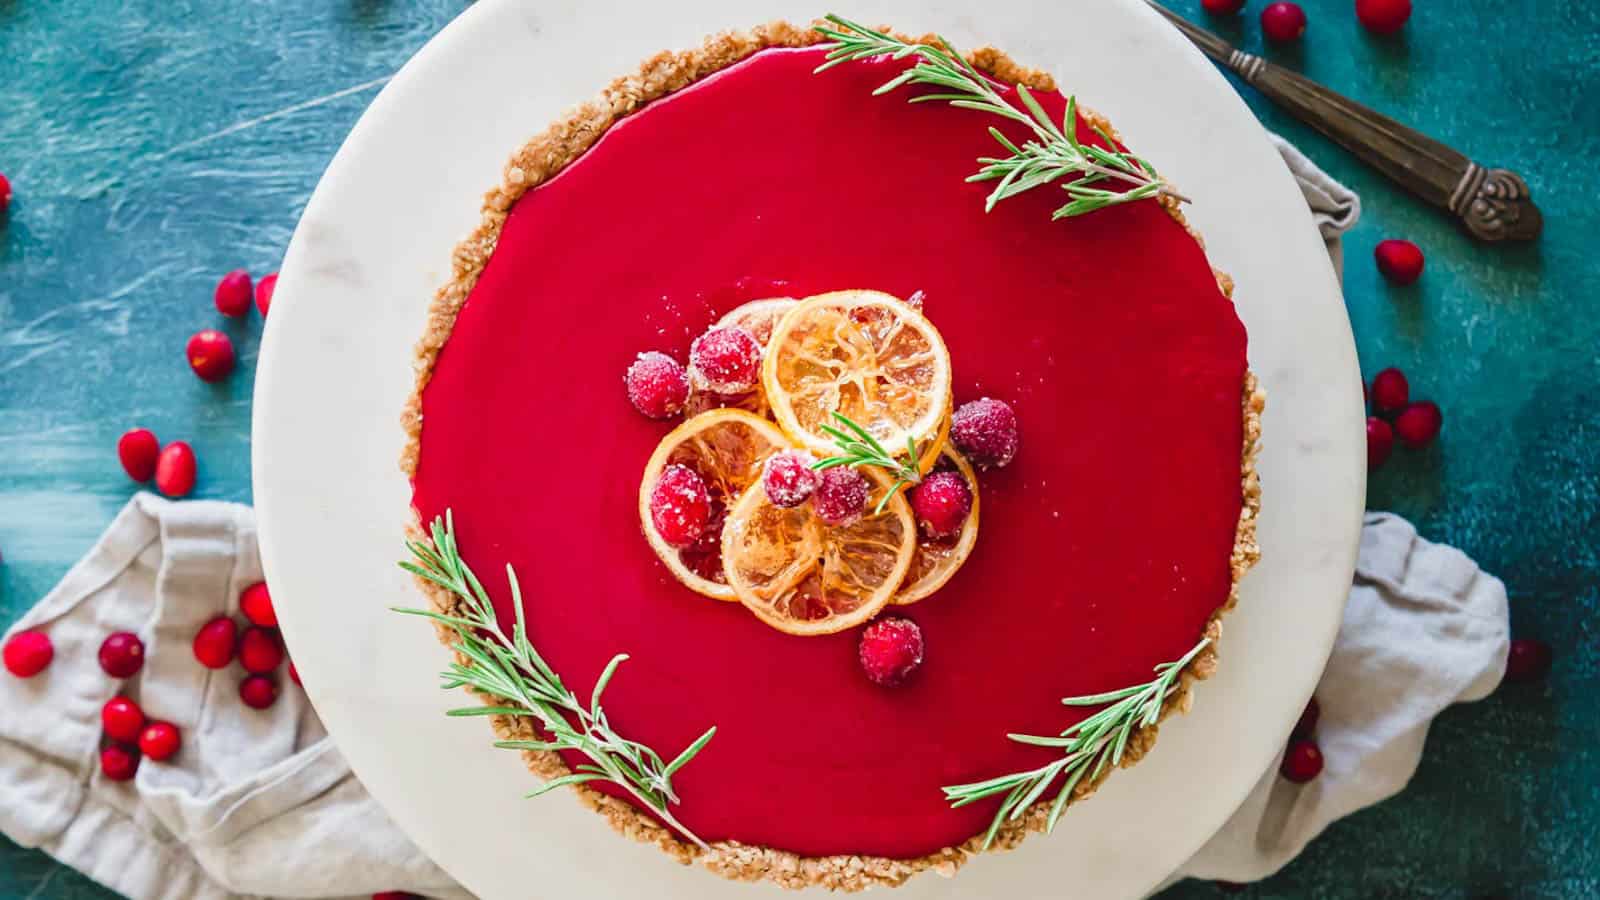 A cranberry curd tart on a plate with rosemary sprigs and candied lemon slices.